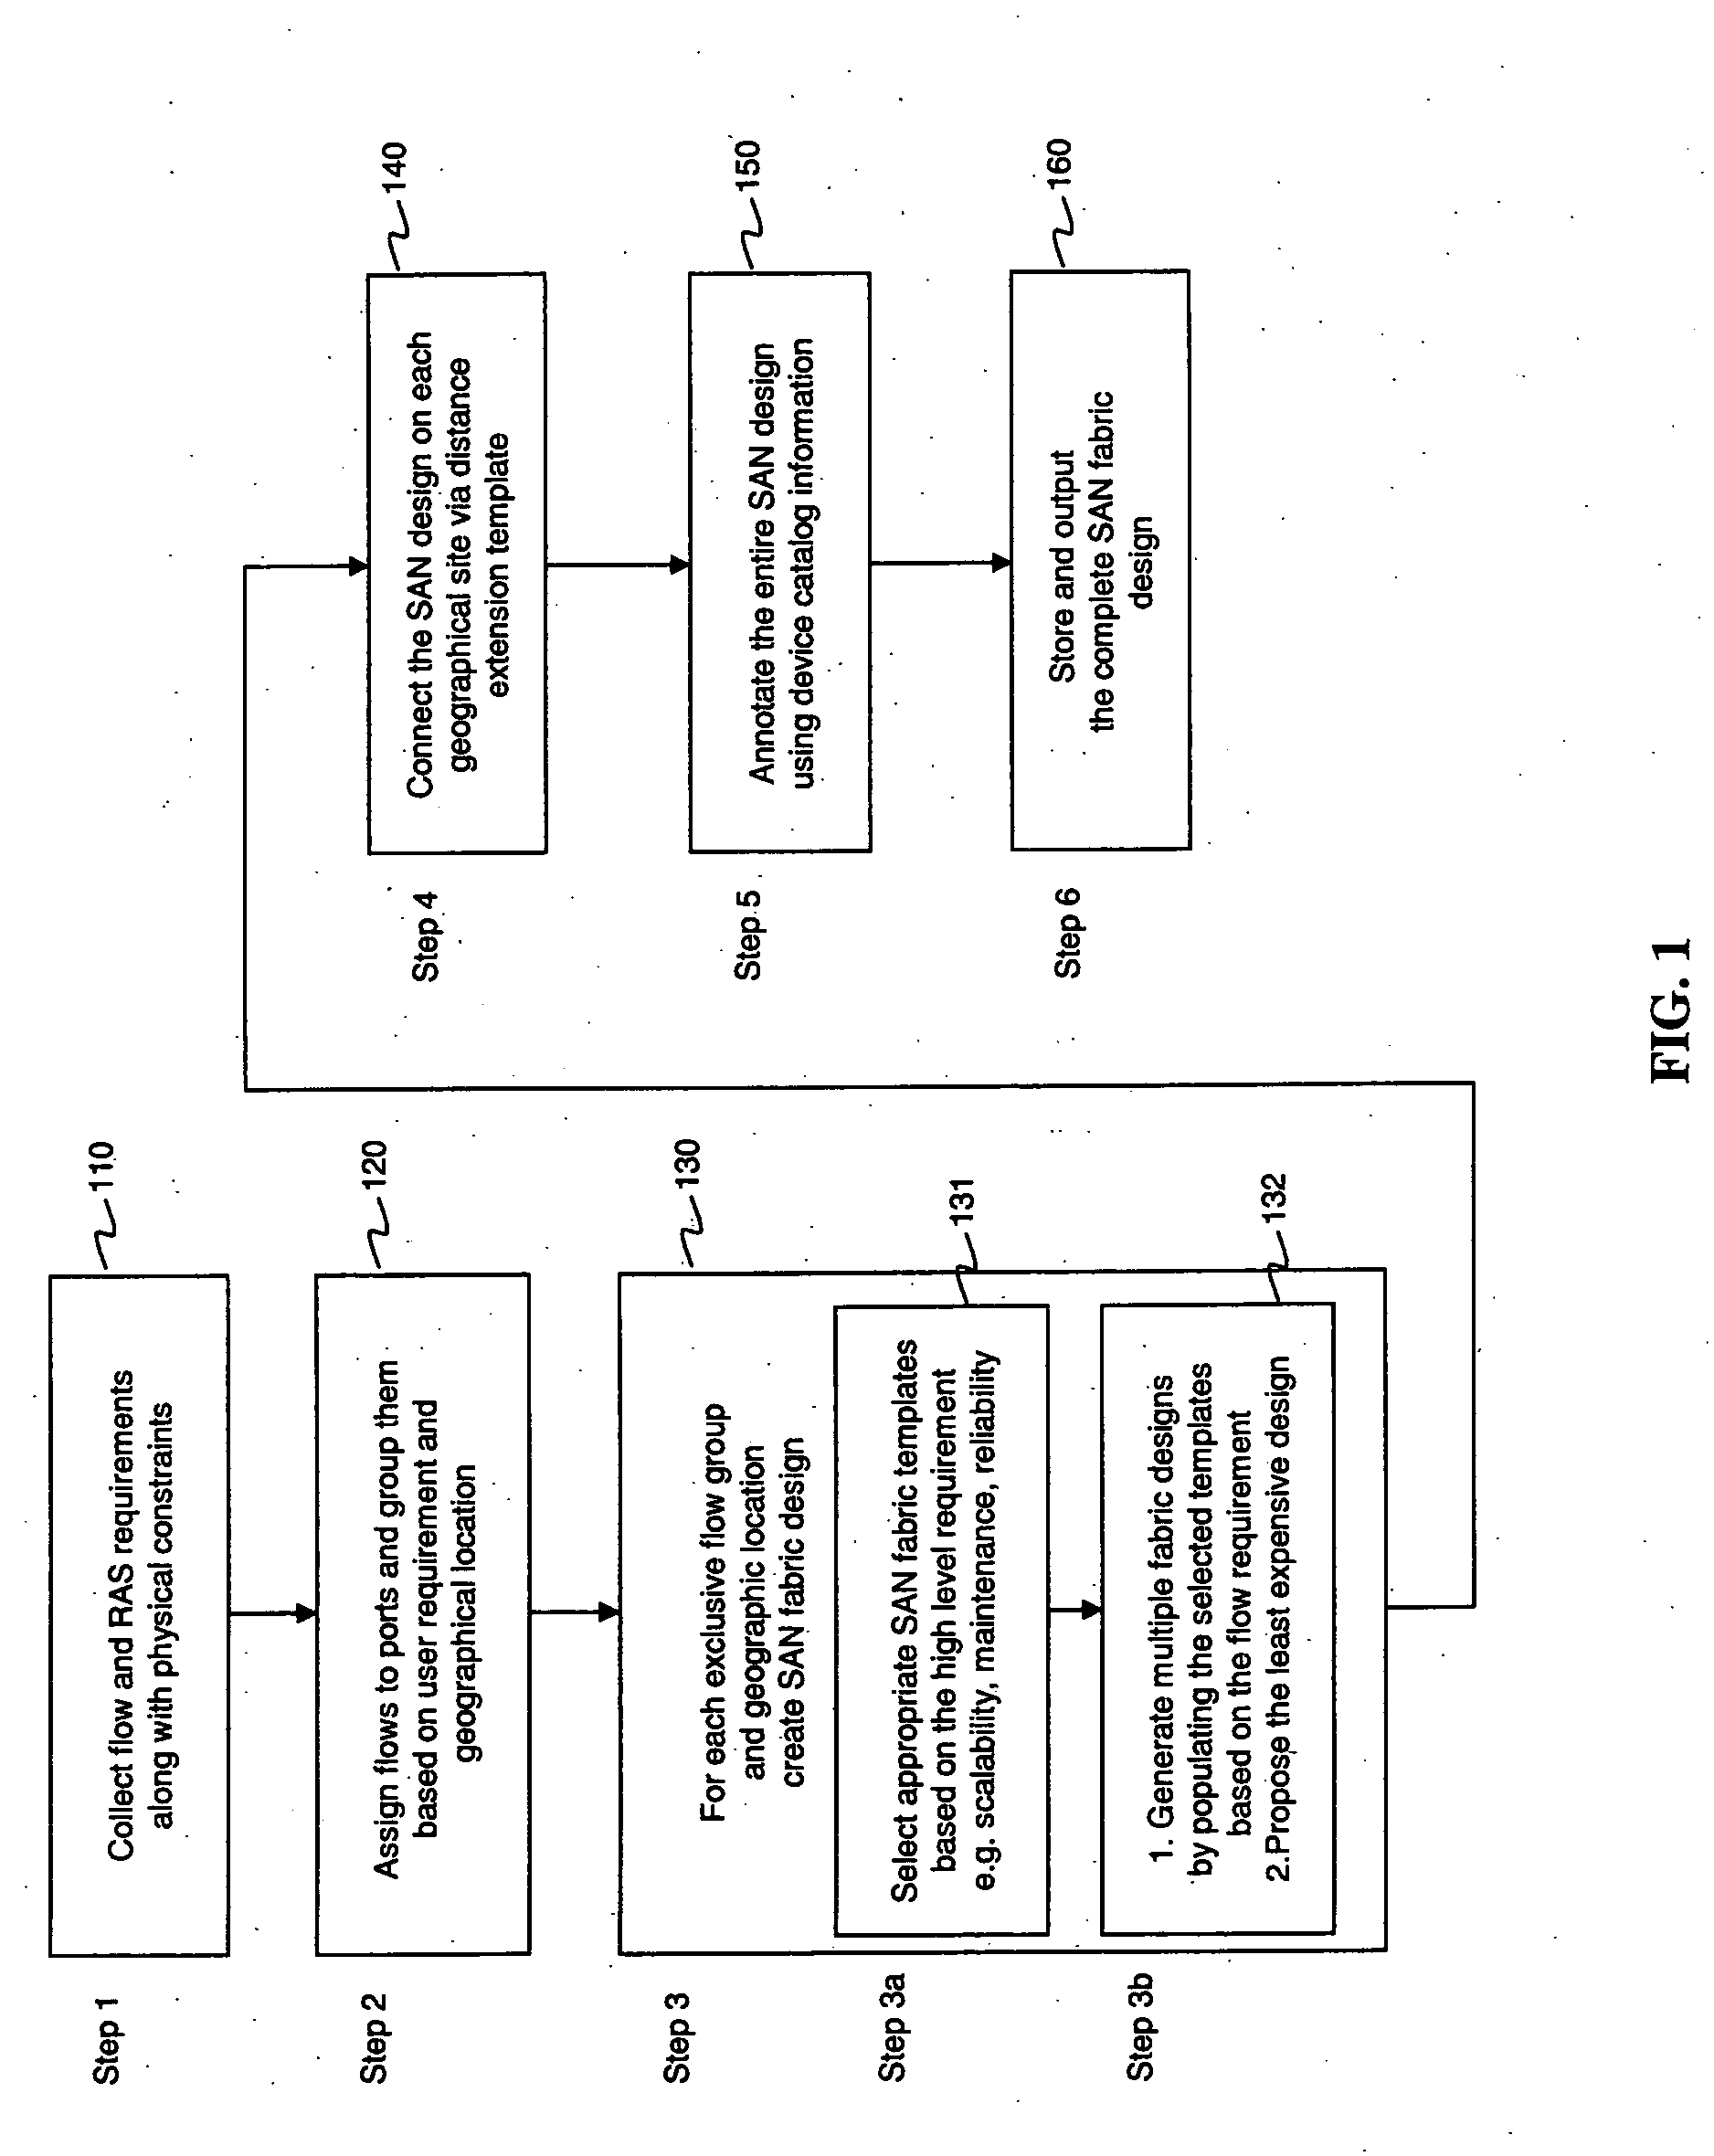 Systems and methods for storage area network design